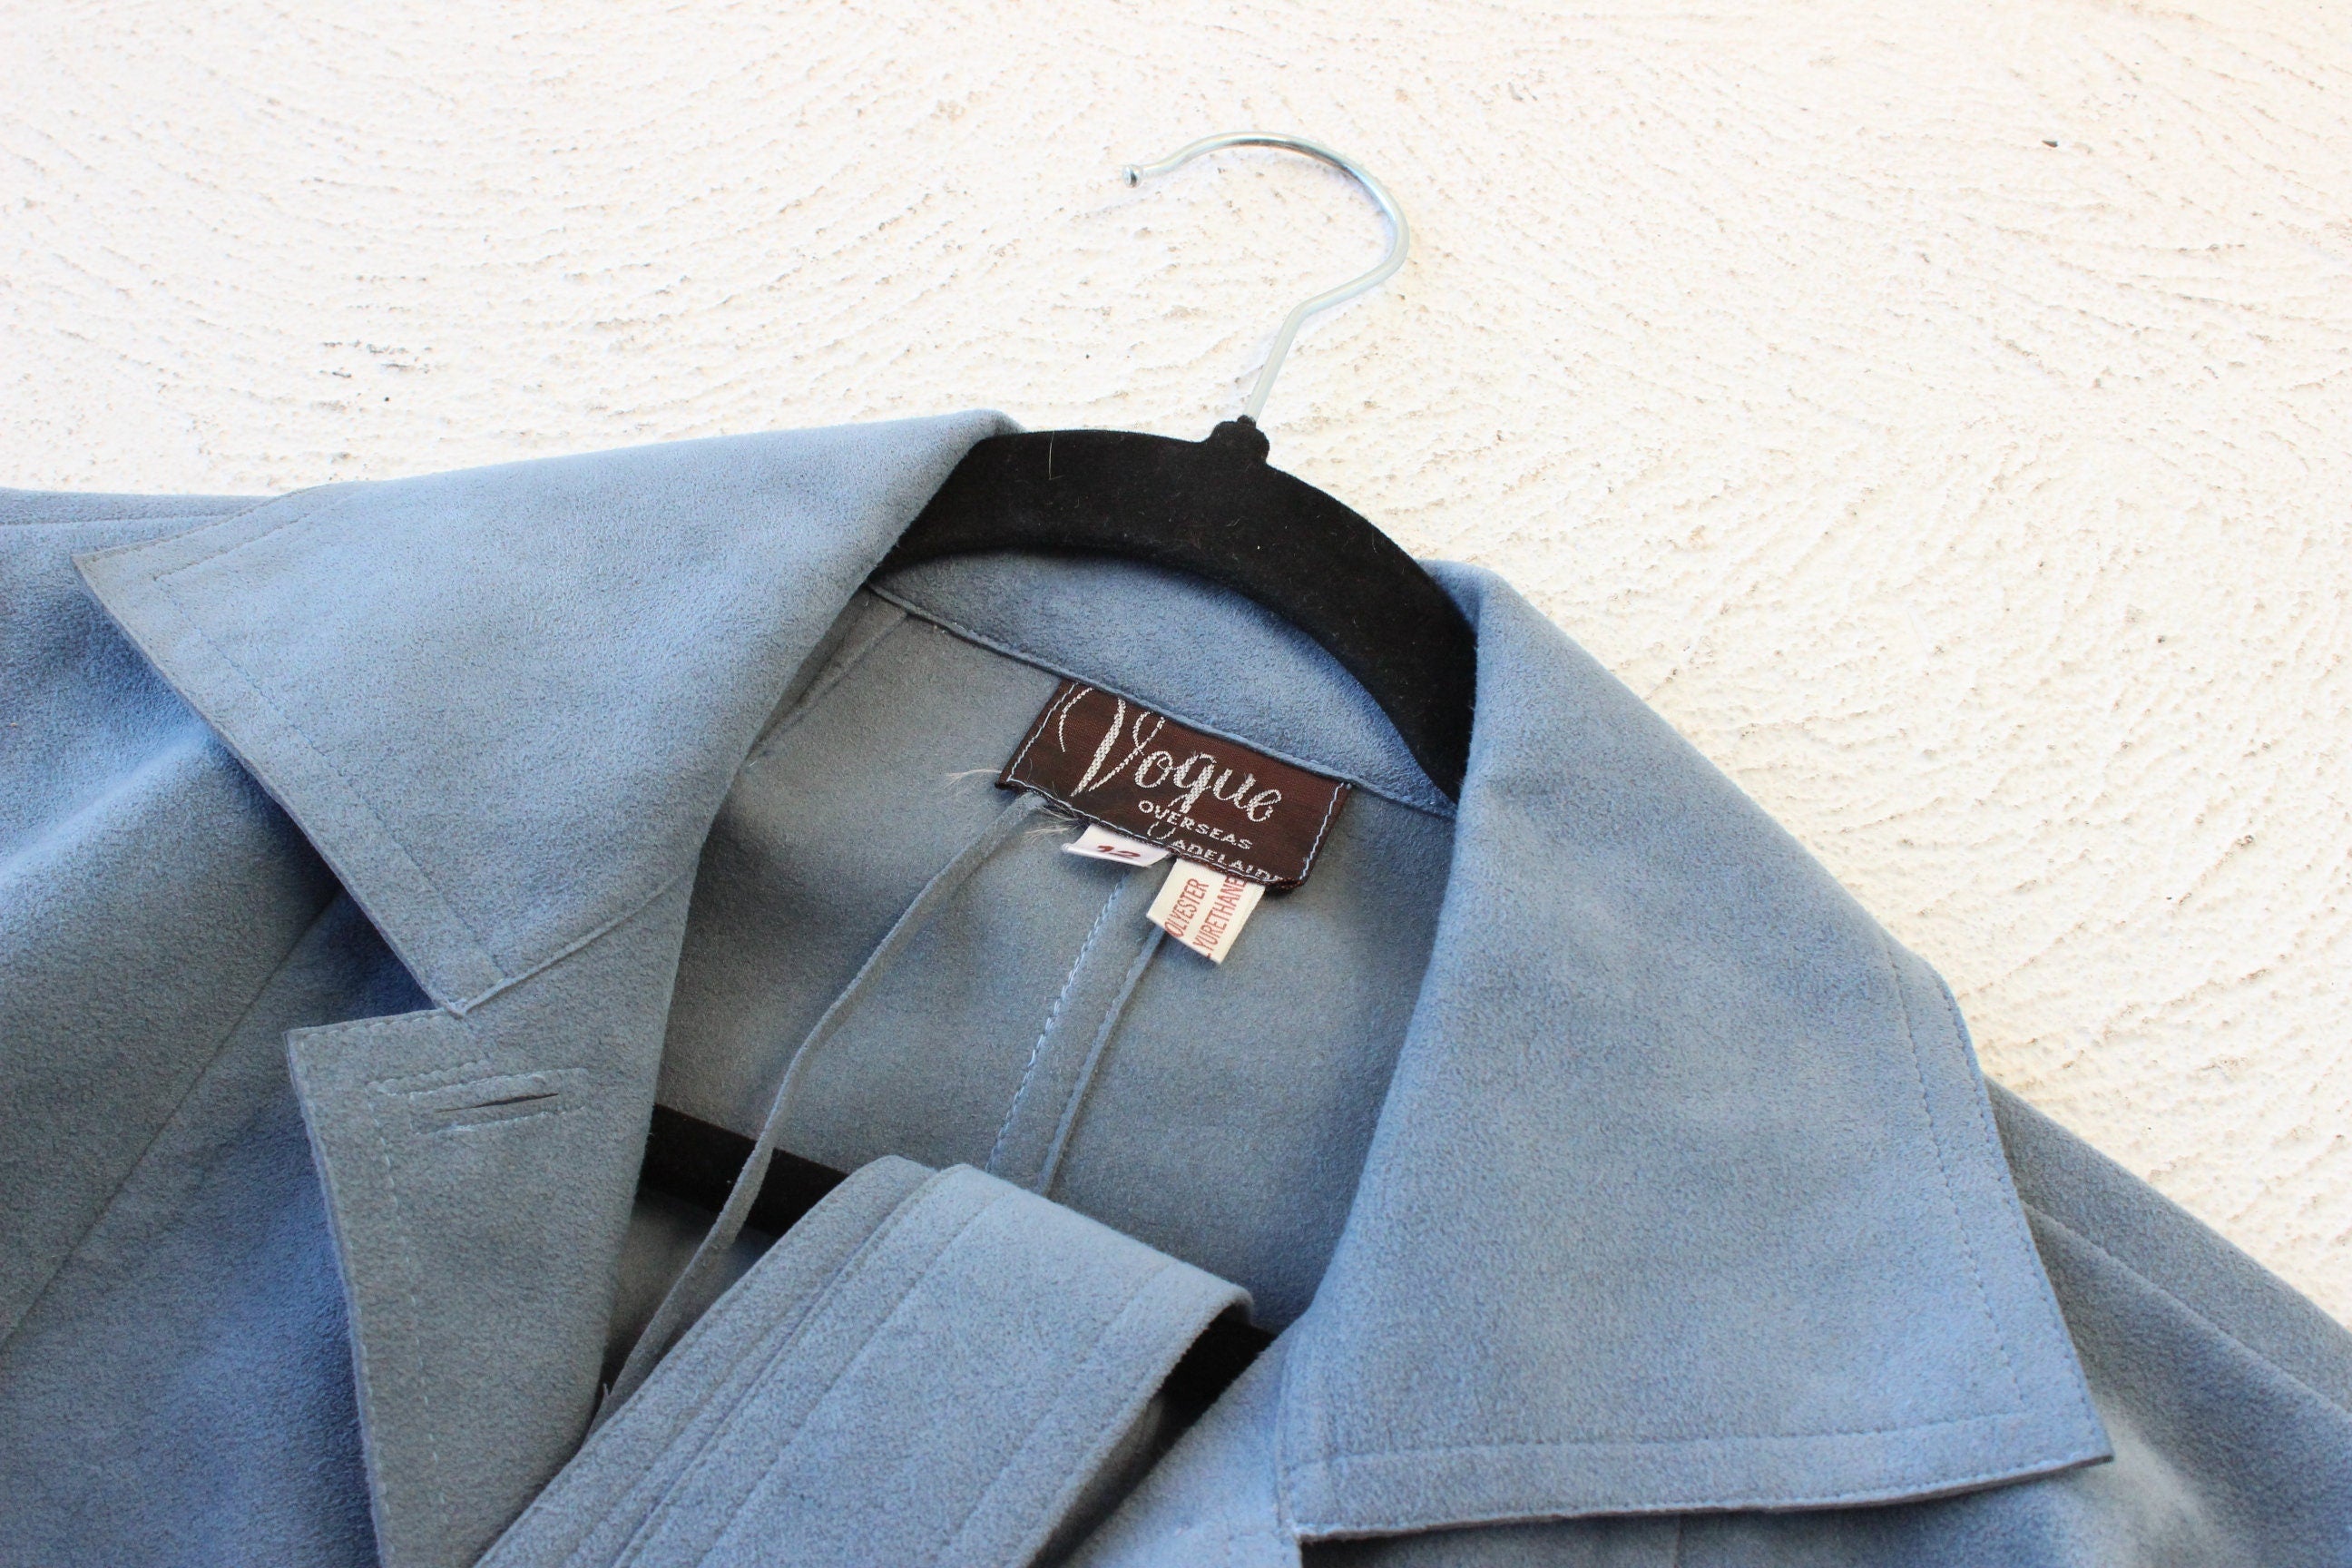 70s Sky Blue Suede Look Belted Trench Coat